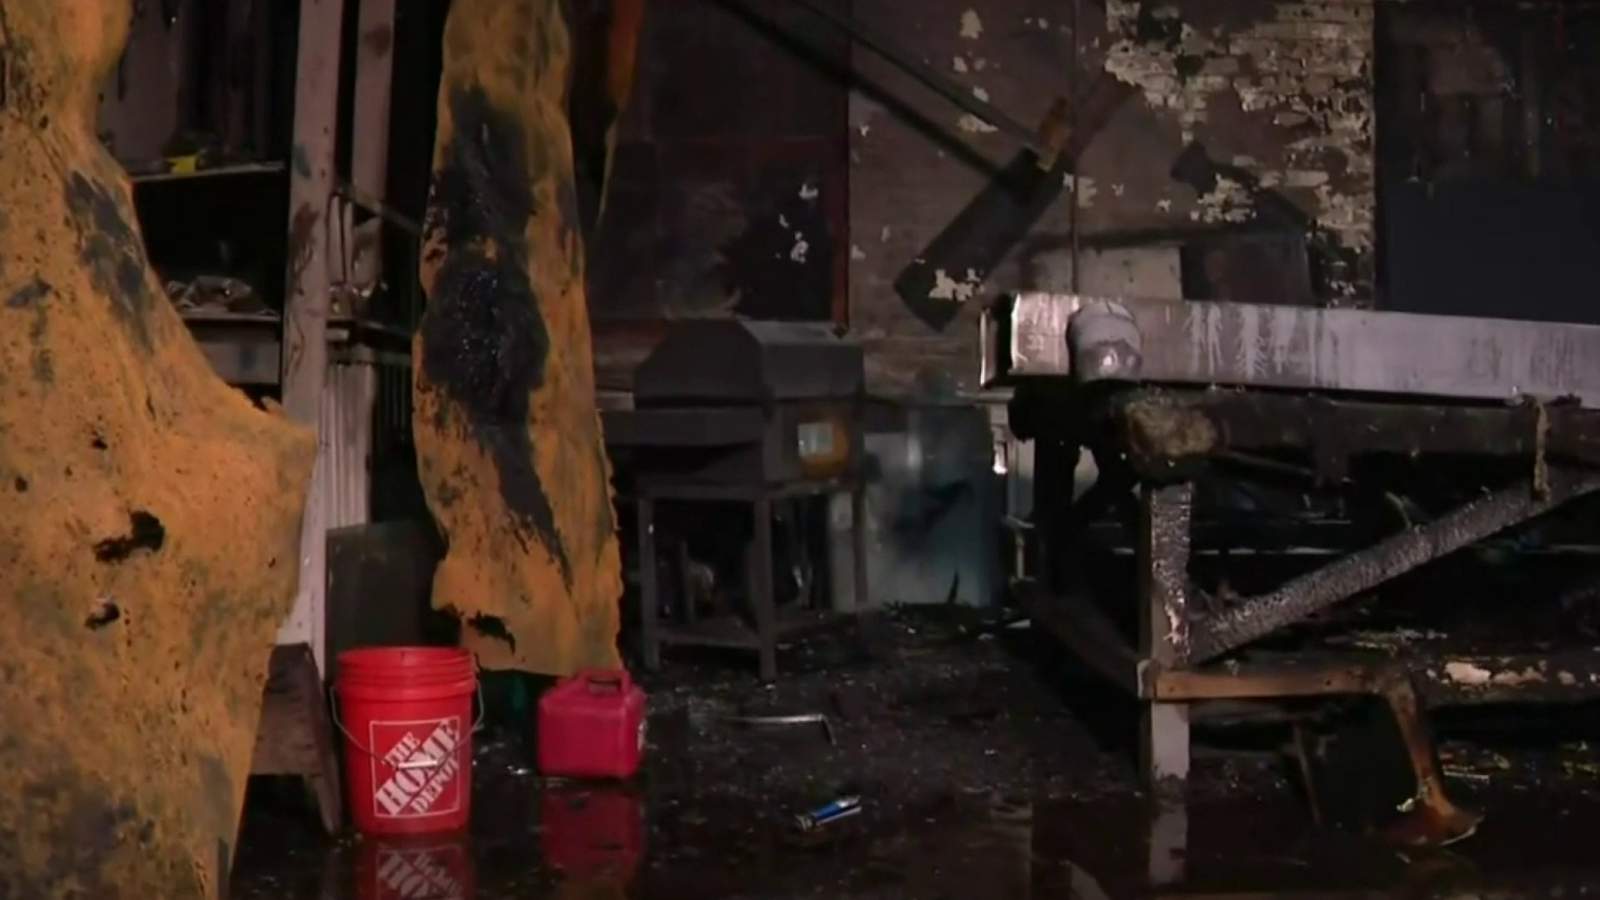 ‘I’m lost for words’ -- Detroit family-owned business set on fire